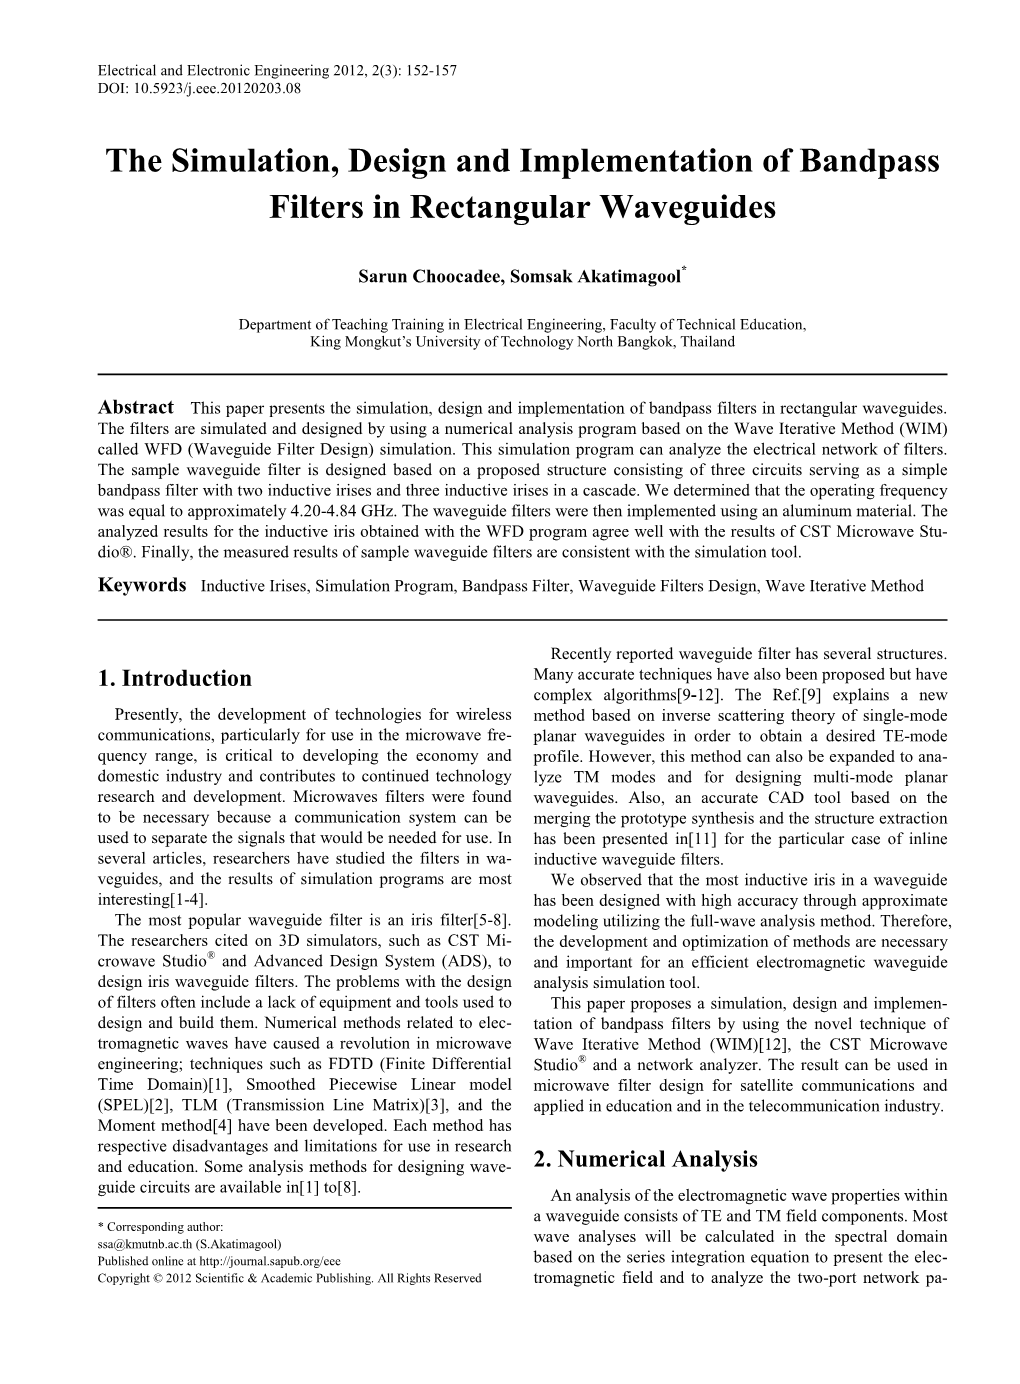 The Simulation, Design and Implementation of Bandpass Filters in Rectangular Waveguides